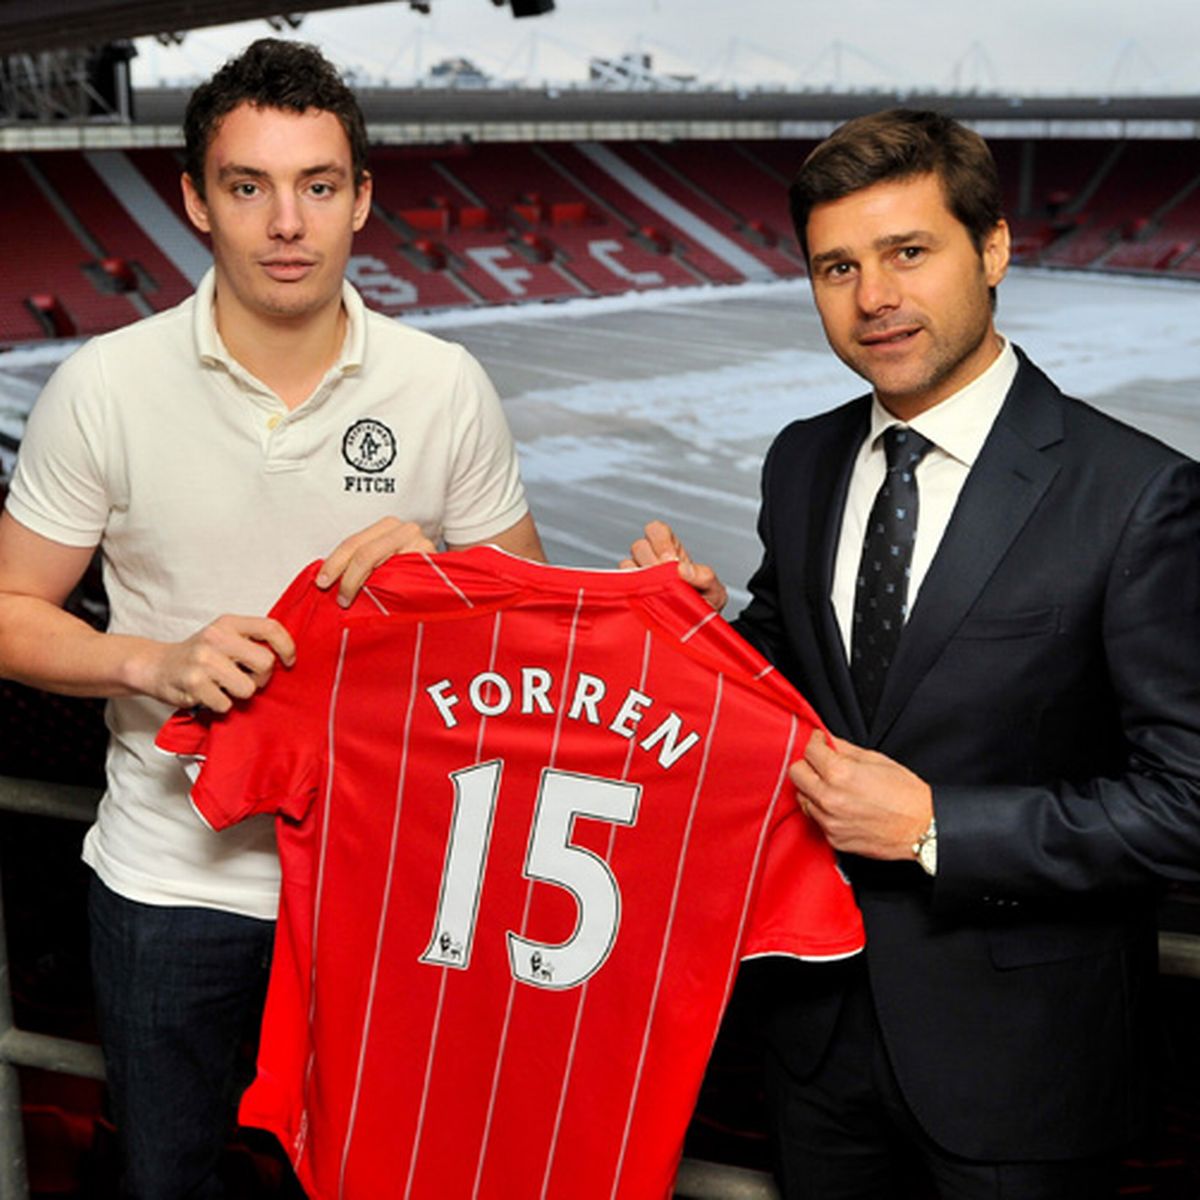 VEGARD FORRENClub: Southampton/BrightonPeriod: 2013, 2017Oddly enough, Forren was at two different Premier League sides, but did not get a single appearance for the clubs' first teams. Both times he arrived from Molde. So, I guess you're excused for not remembering him